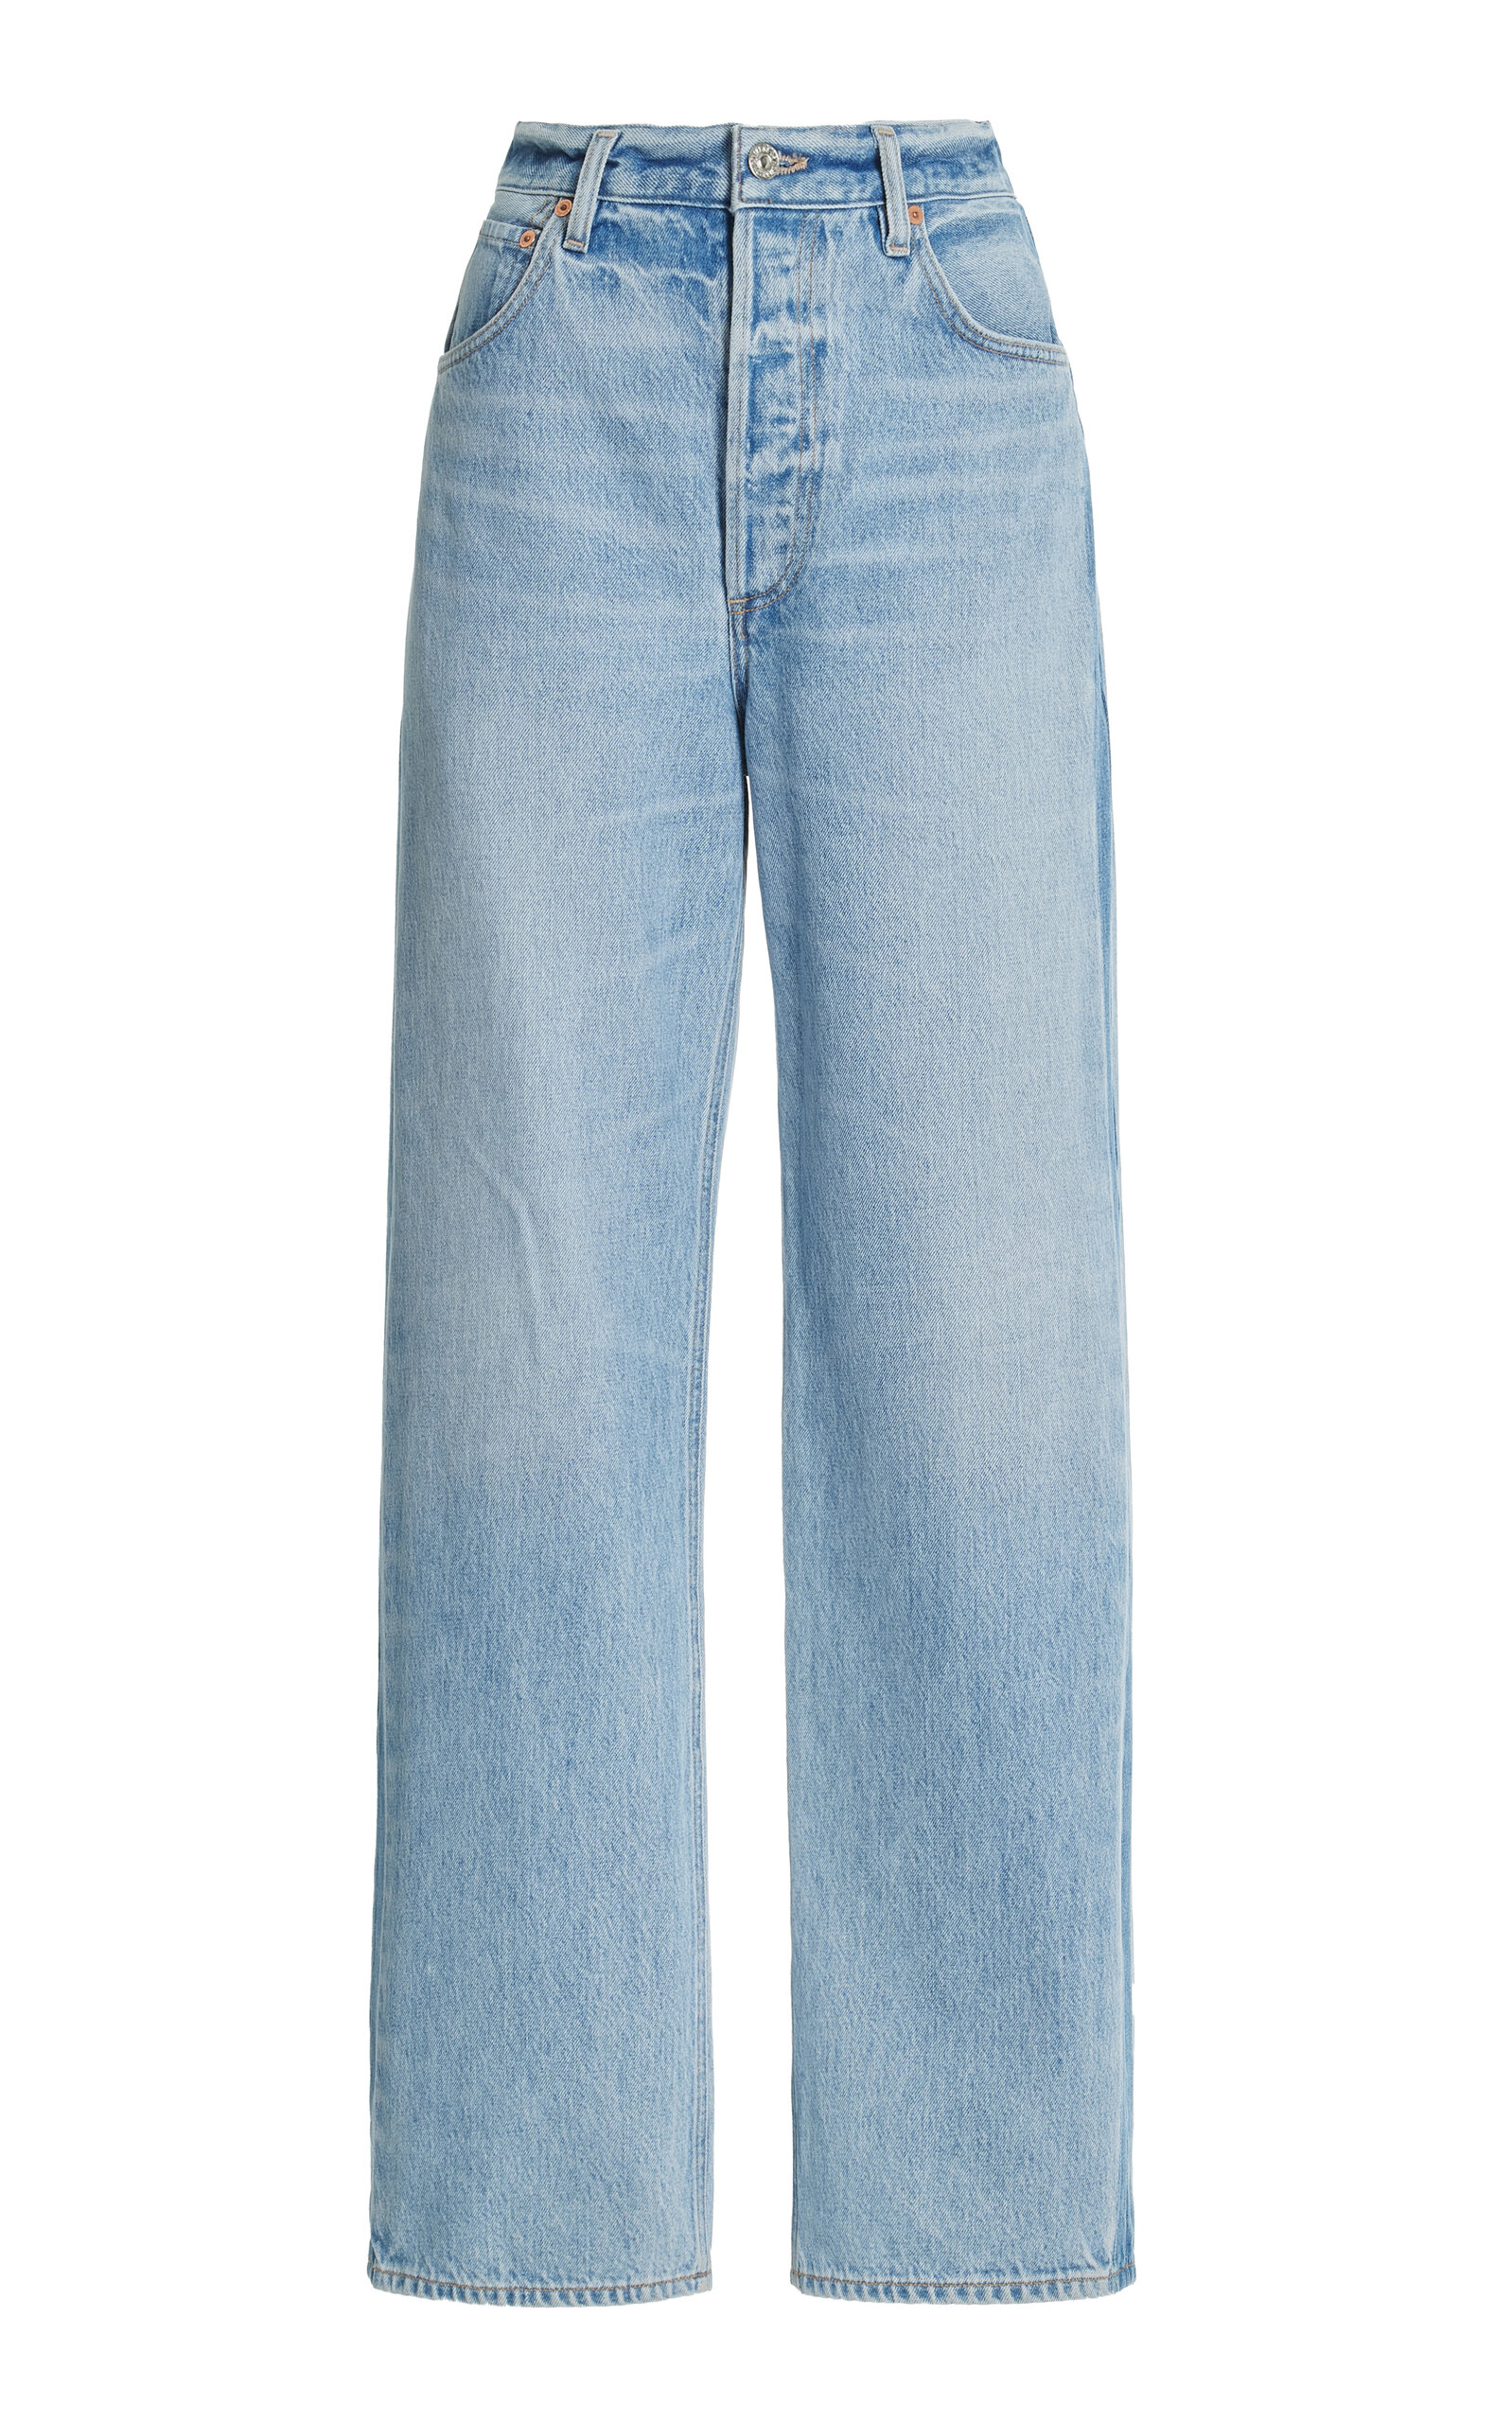 Citizens Of Humanity Ayla Baggy Cuffed Crop Jeans In Light Wash